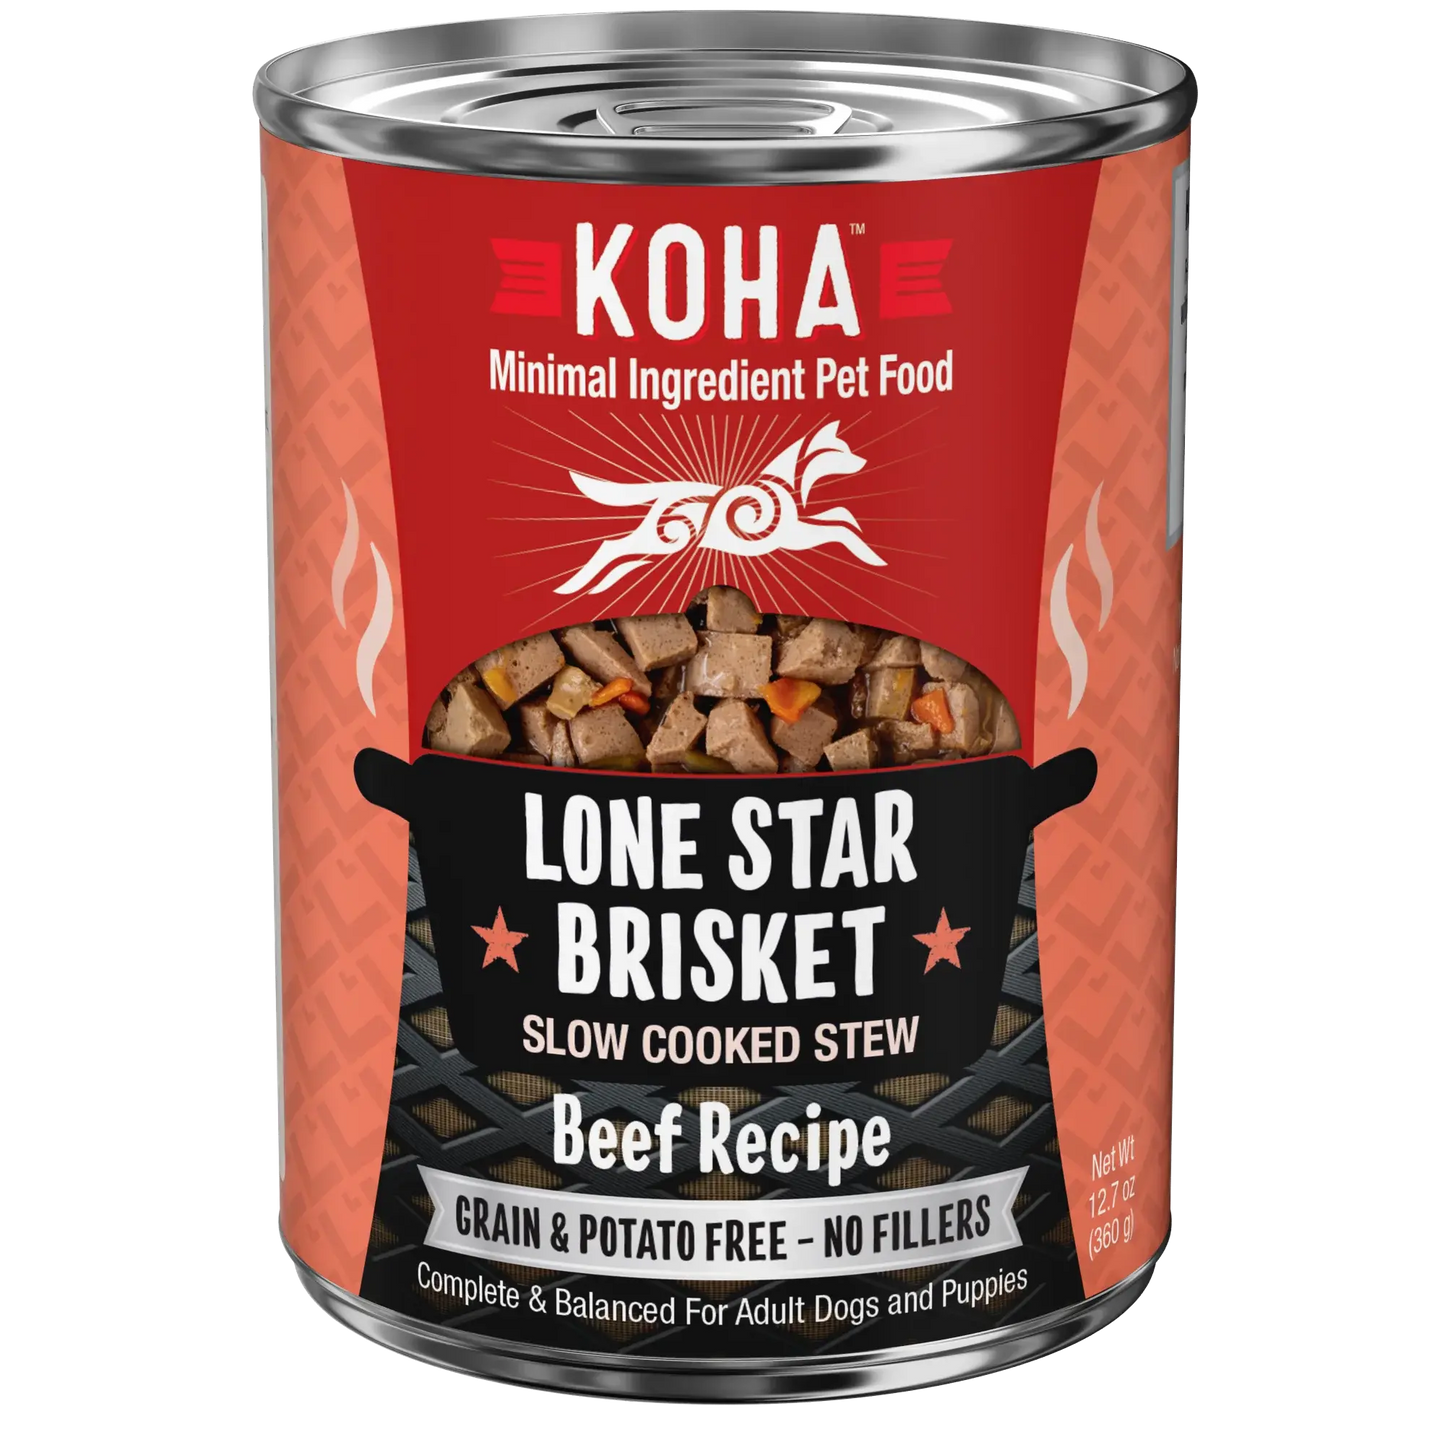 KOHA Lone Star Brisket Slow Cooked Stew Beef Recipe for Dogs 12.7oz Case of 12 KOHA